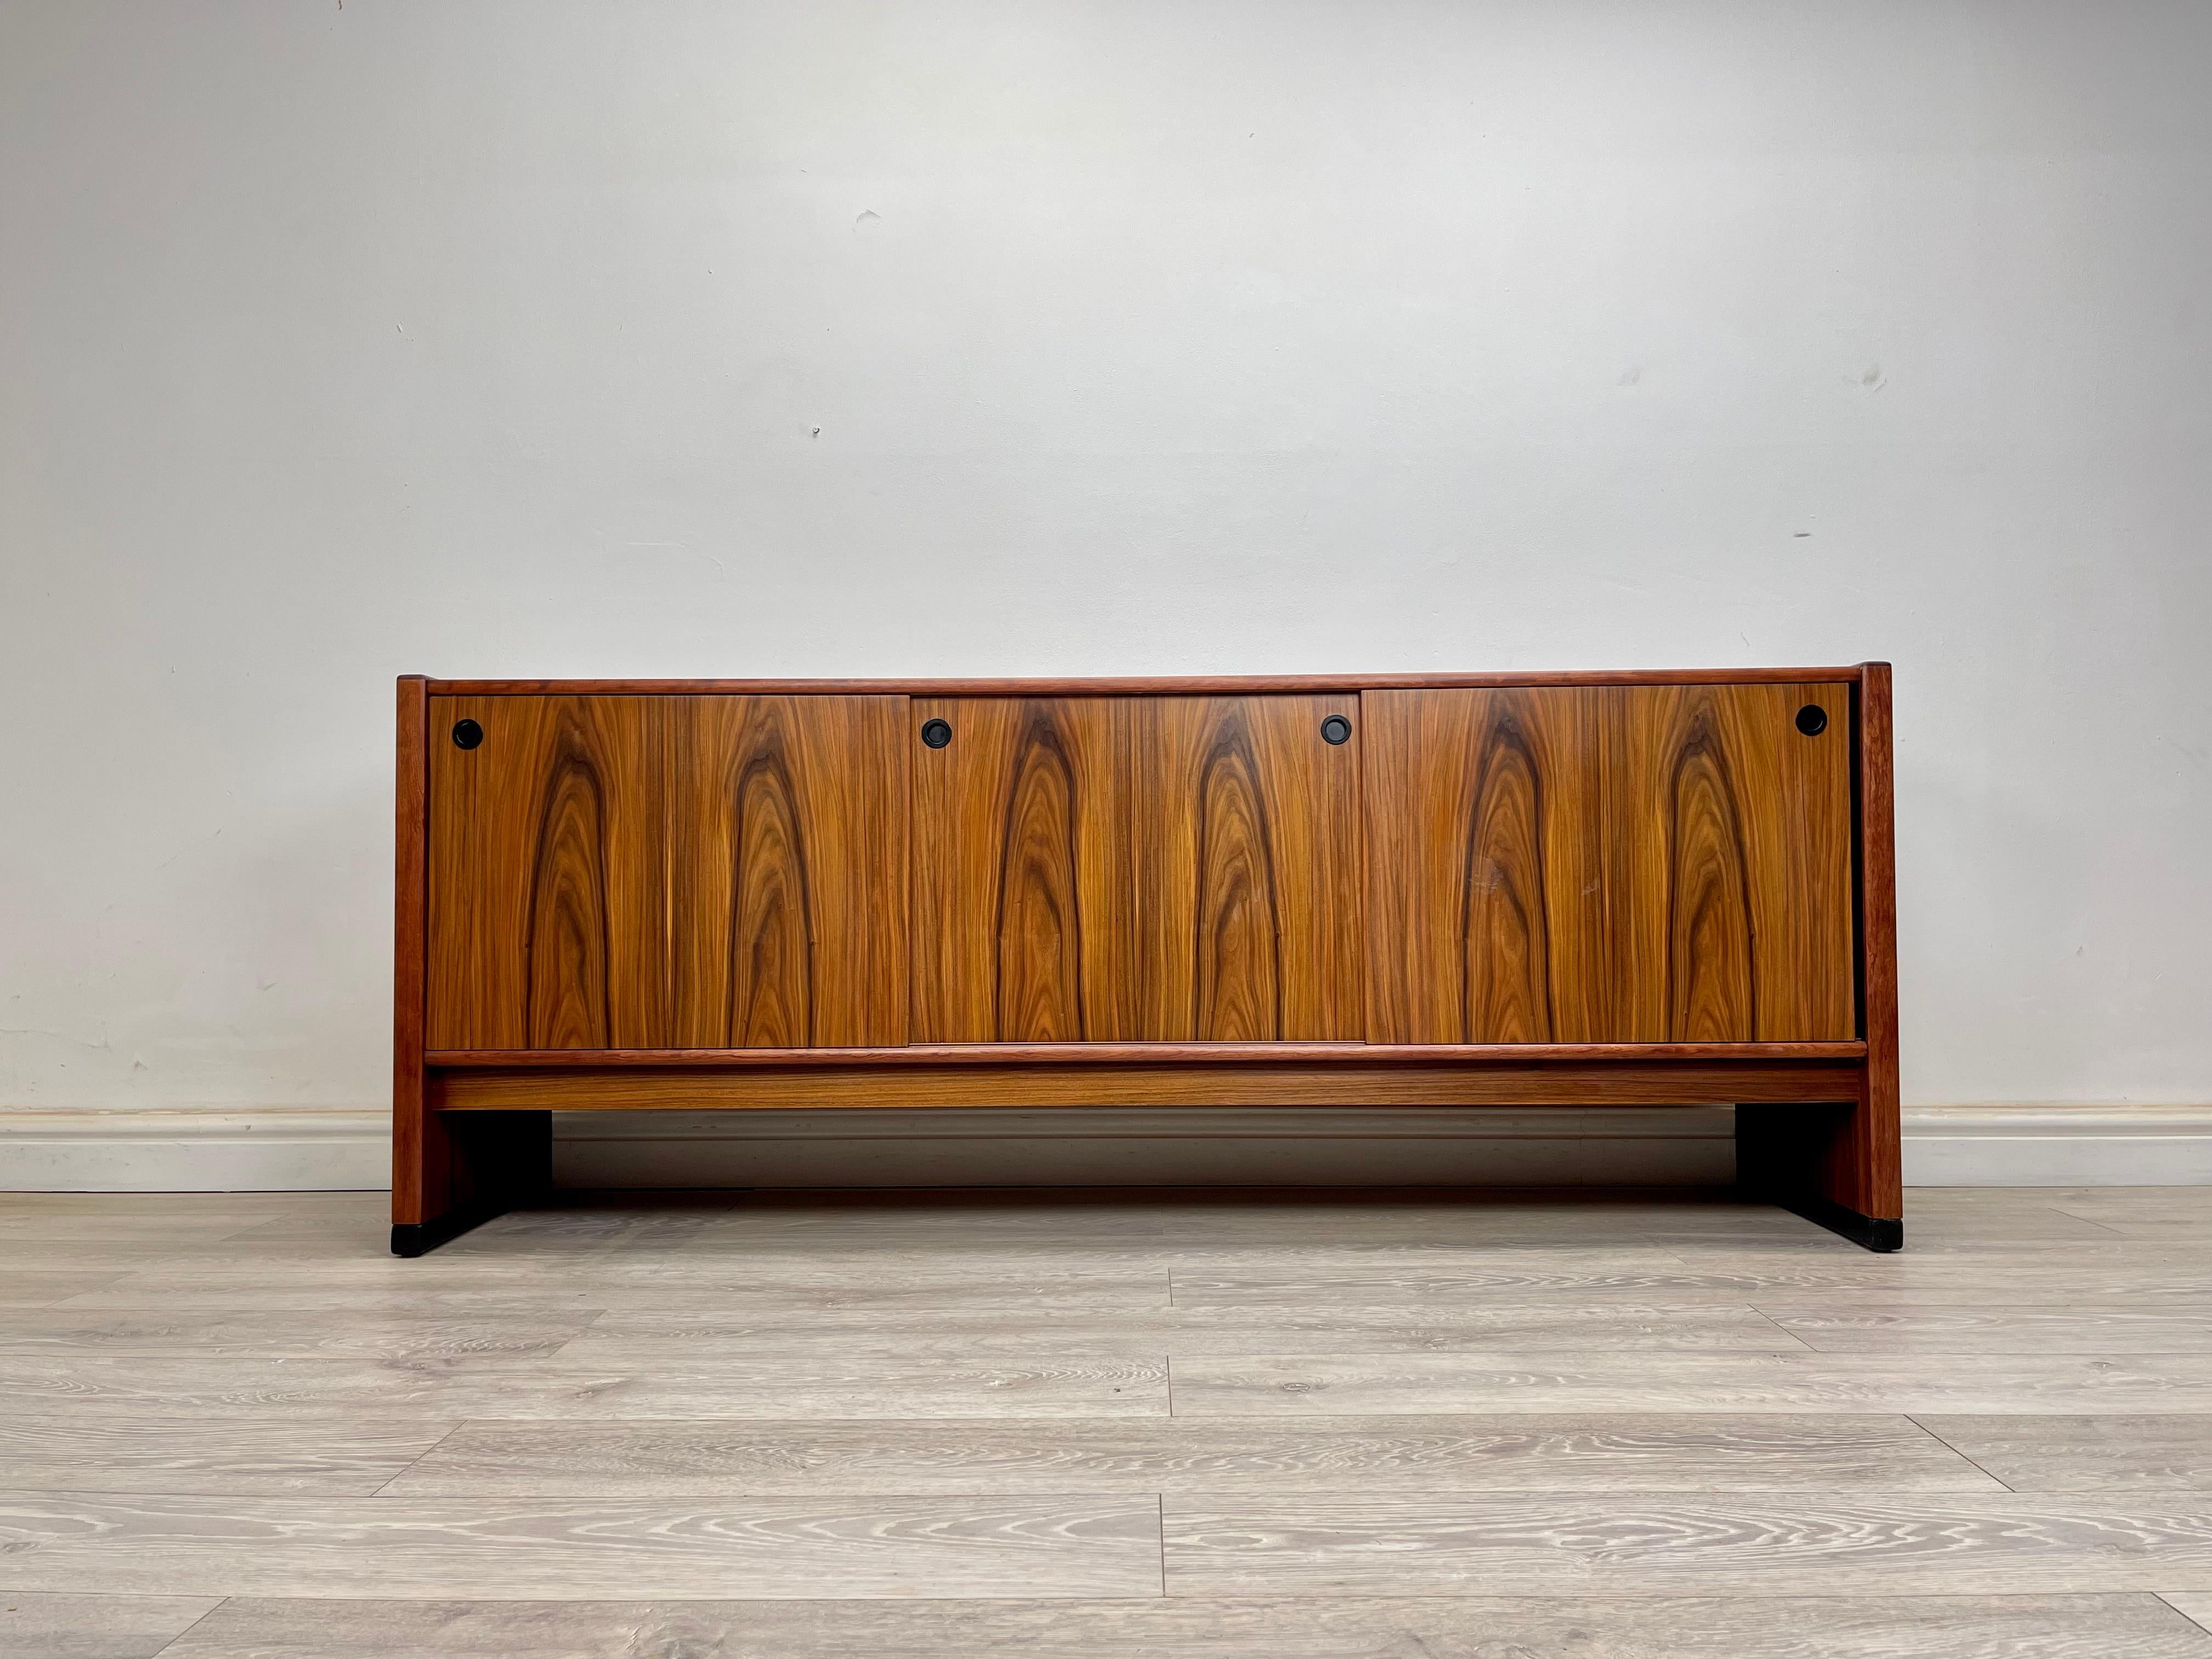 SIDEBOARD 
Stunning midcentury Danish rosewood sideboard made by Skovby circa 1970s showroom condition . 

The sideboard has sleek Minimalist design with plenty of storage , stunning rosewood grain throughout . 

There’s three sliding doors